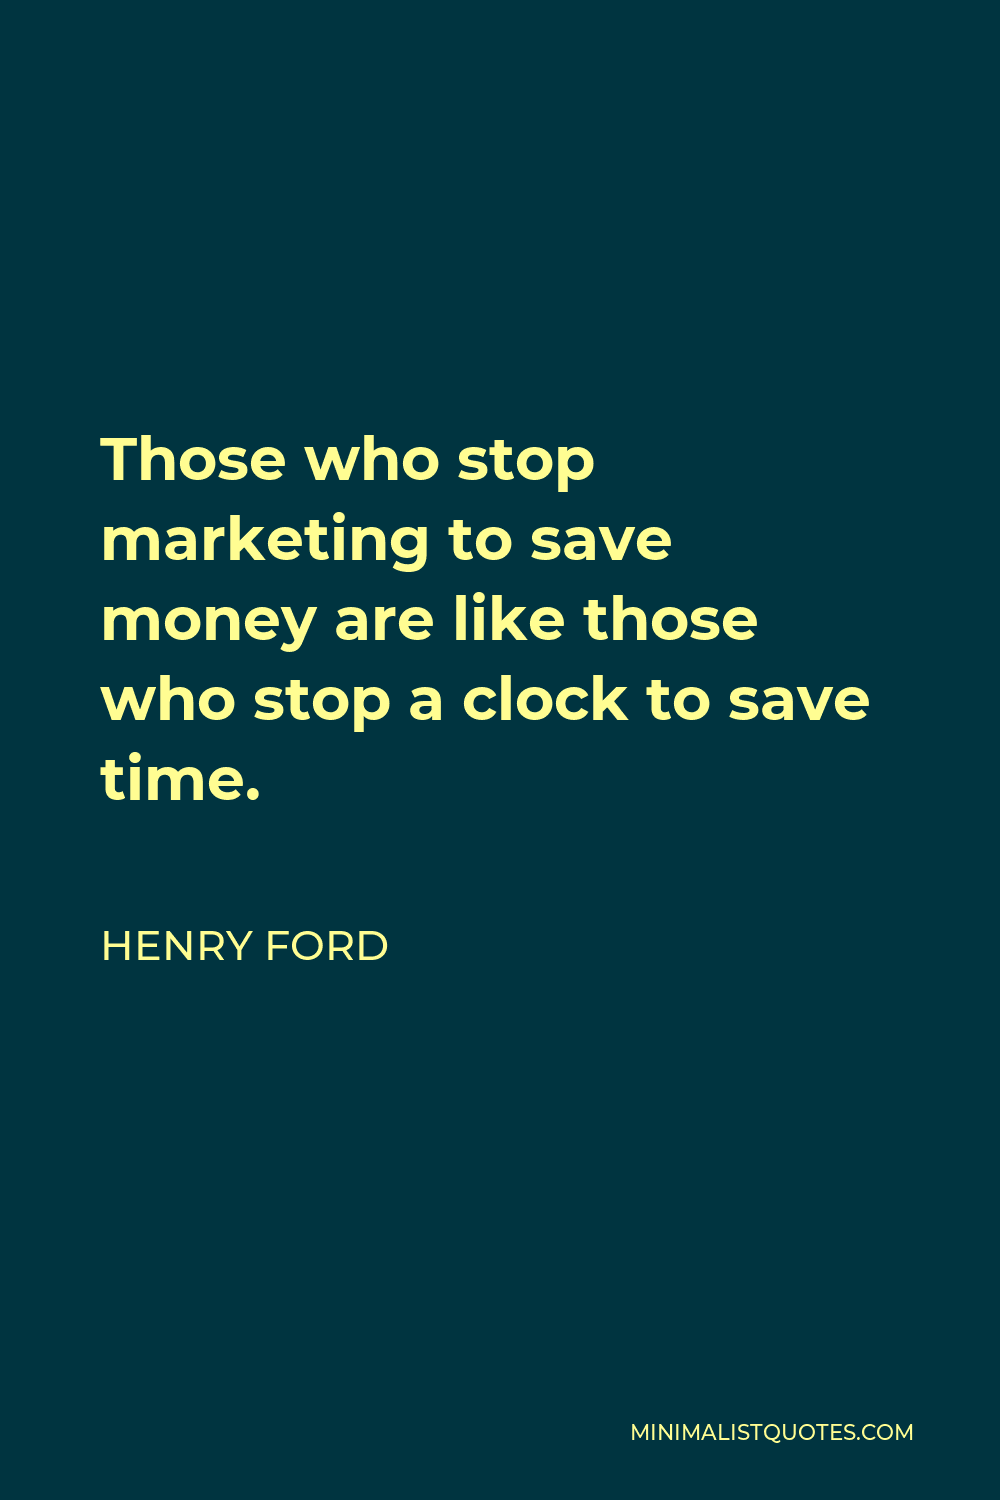 Henry Ford Quote - Those who stop marketing to save money are like those who stop a clock to save time.